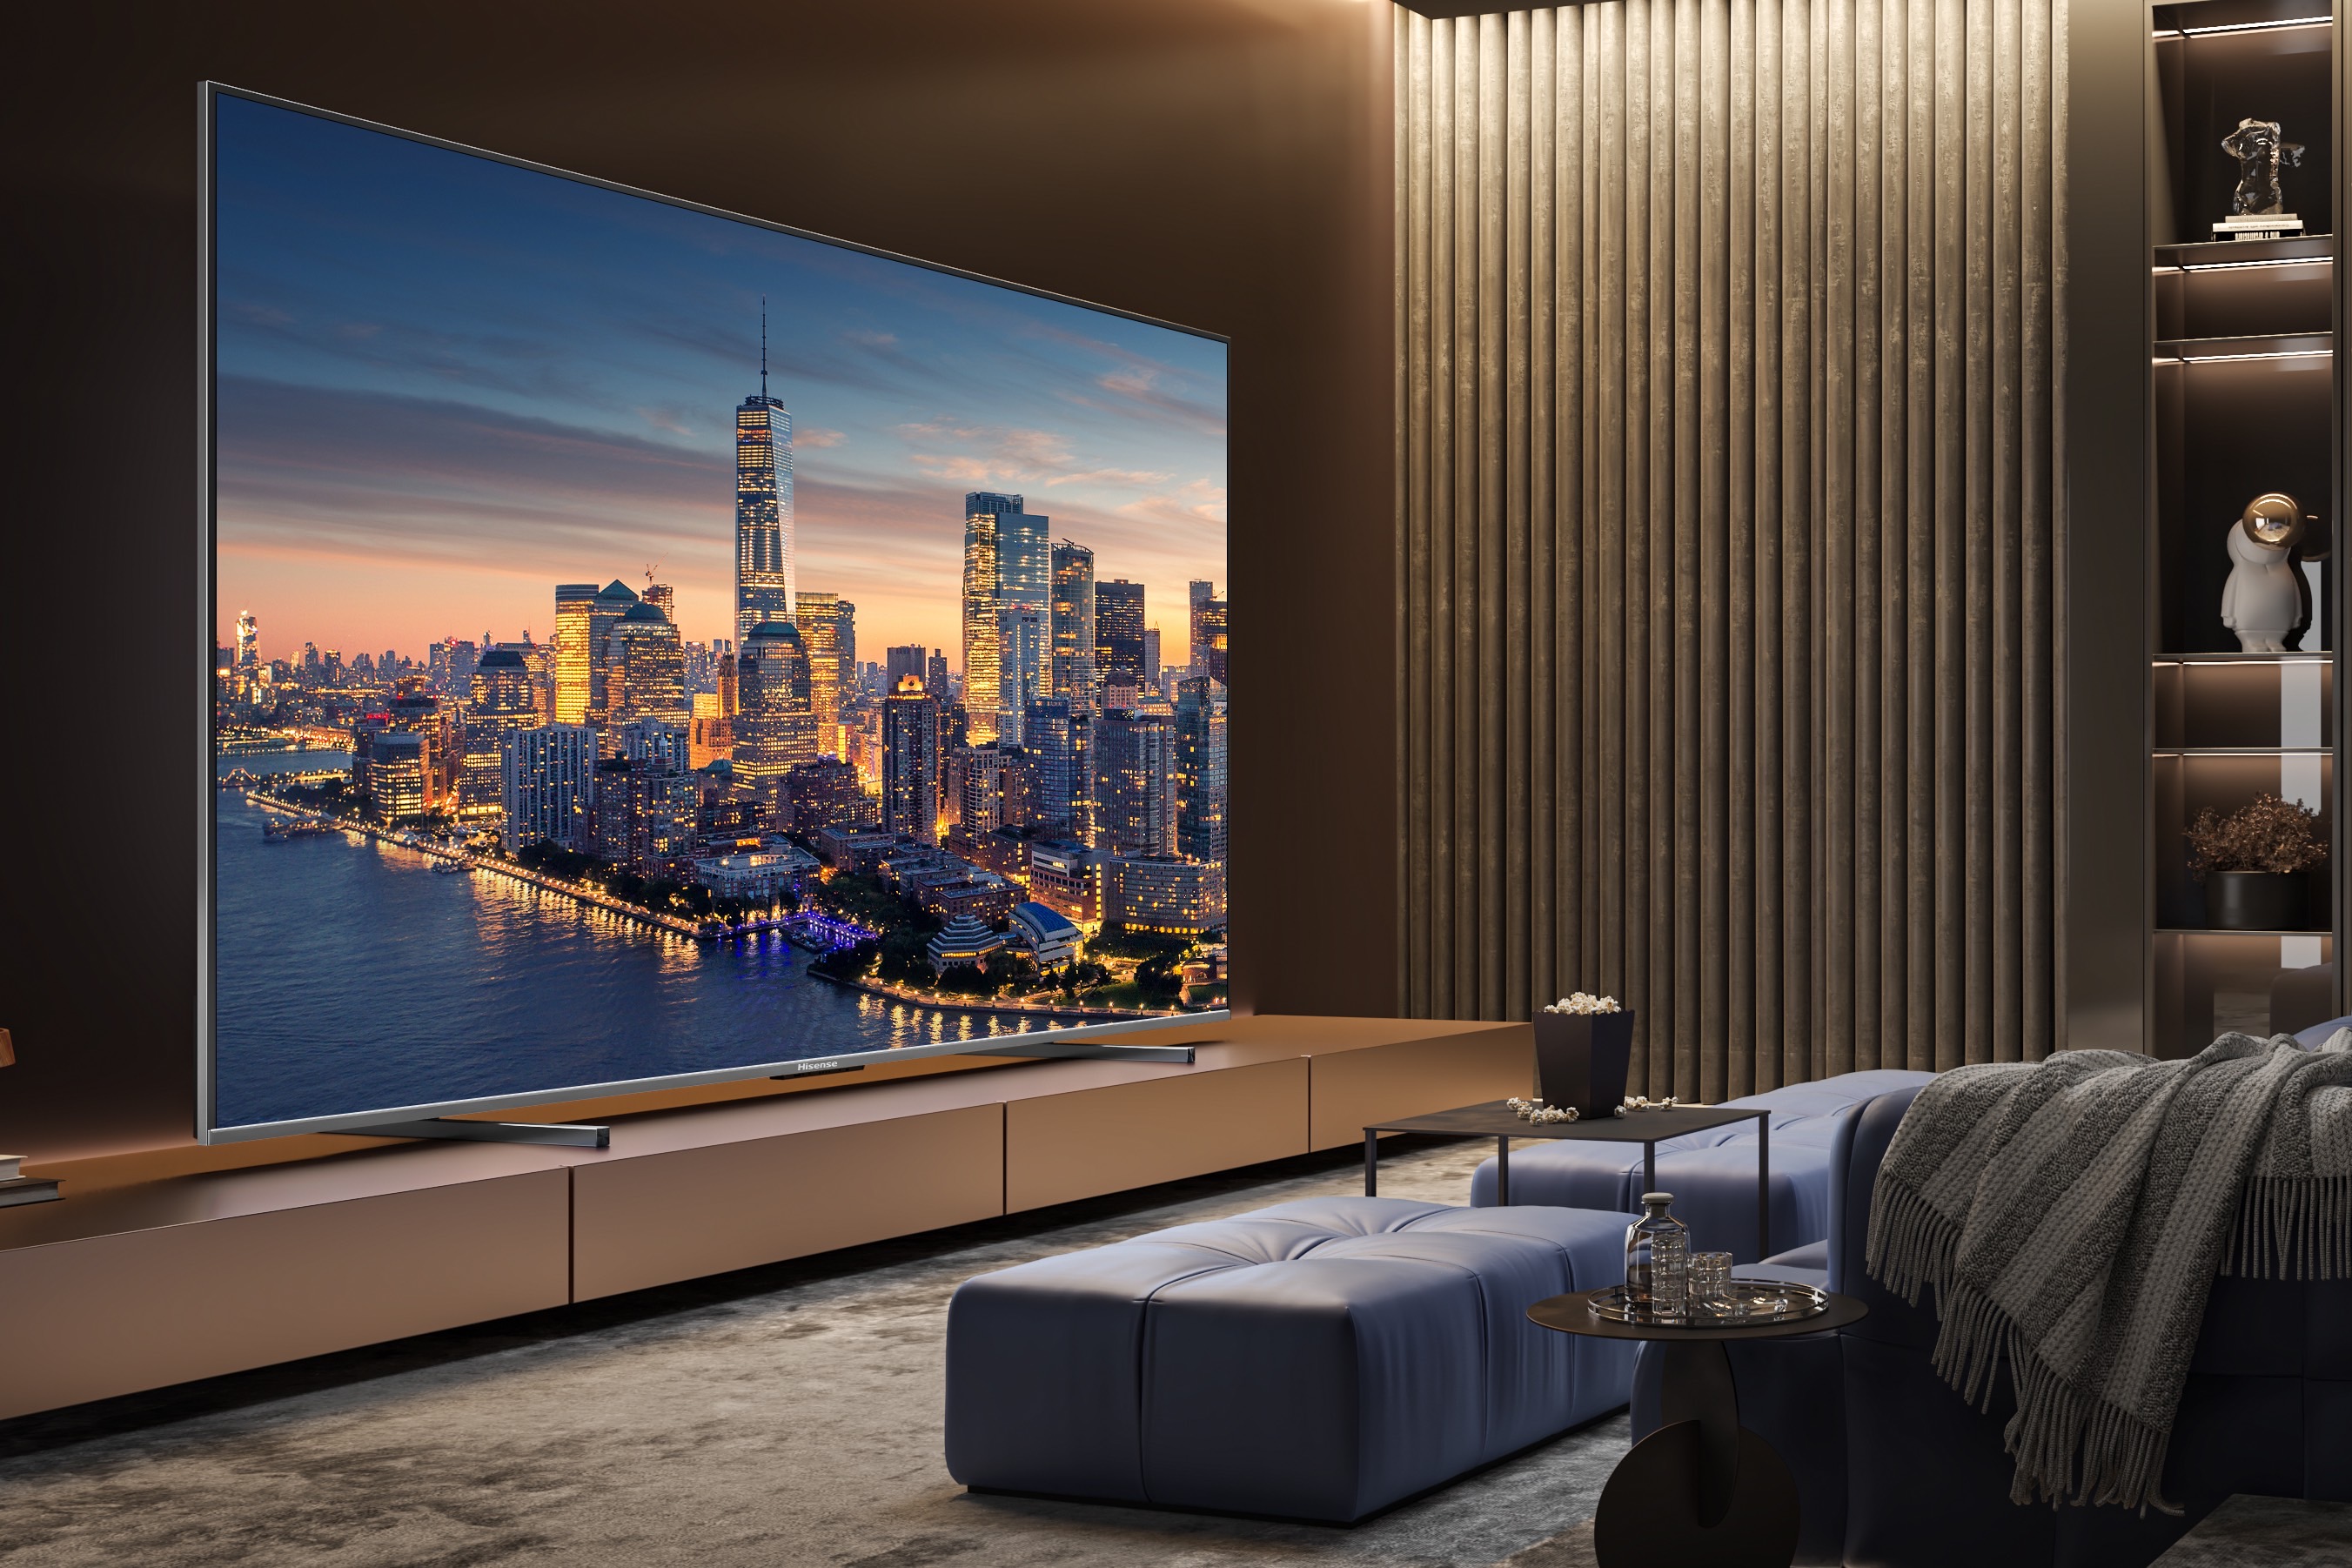 Hisense just debuted the world's largest mini-LED TV at 100 inches